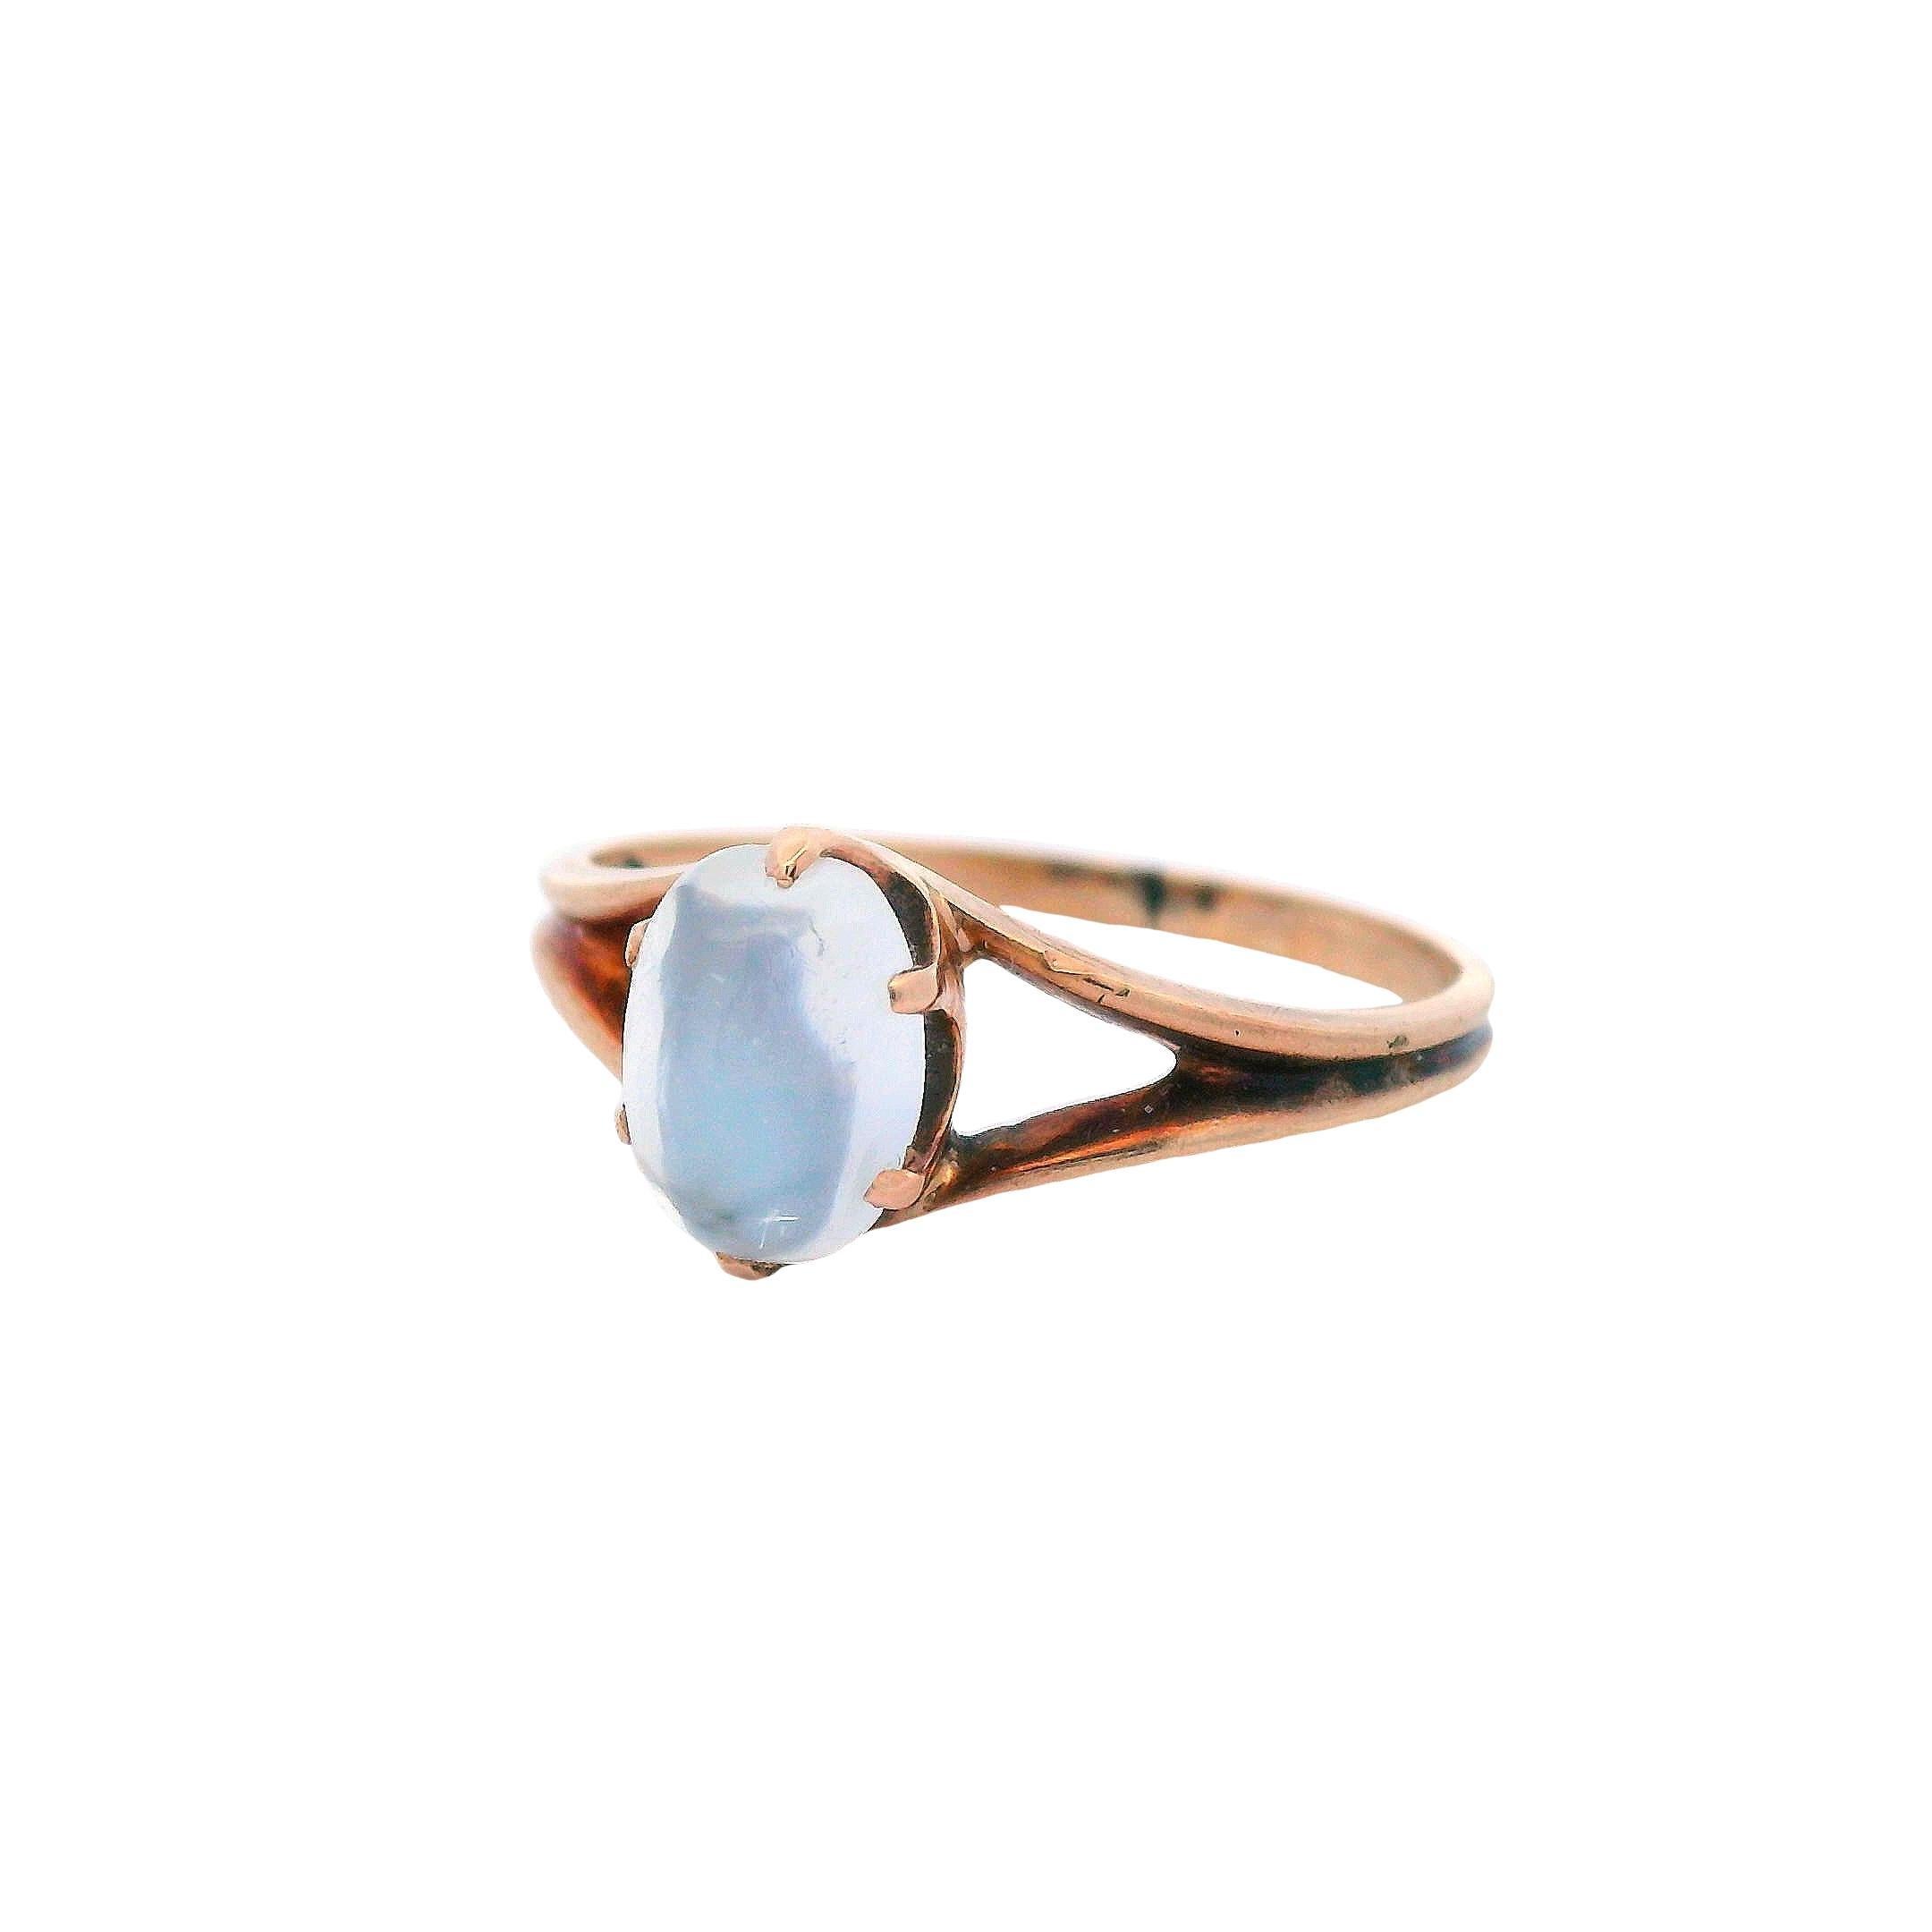 This is a beautiful 14k rose gold ring, featuring a cats eye moonstone cabochon, from the 1890 Victorian era. Cats eye moonstone gets its name from the parallel oriented fibers, or needle-like inclusions, that provide the 'cats eye' look within the